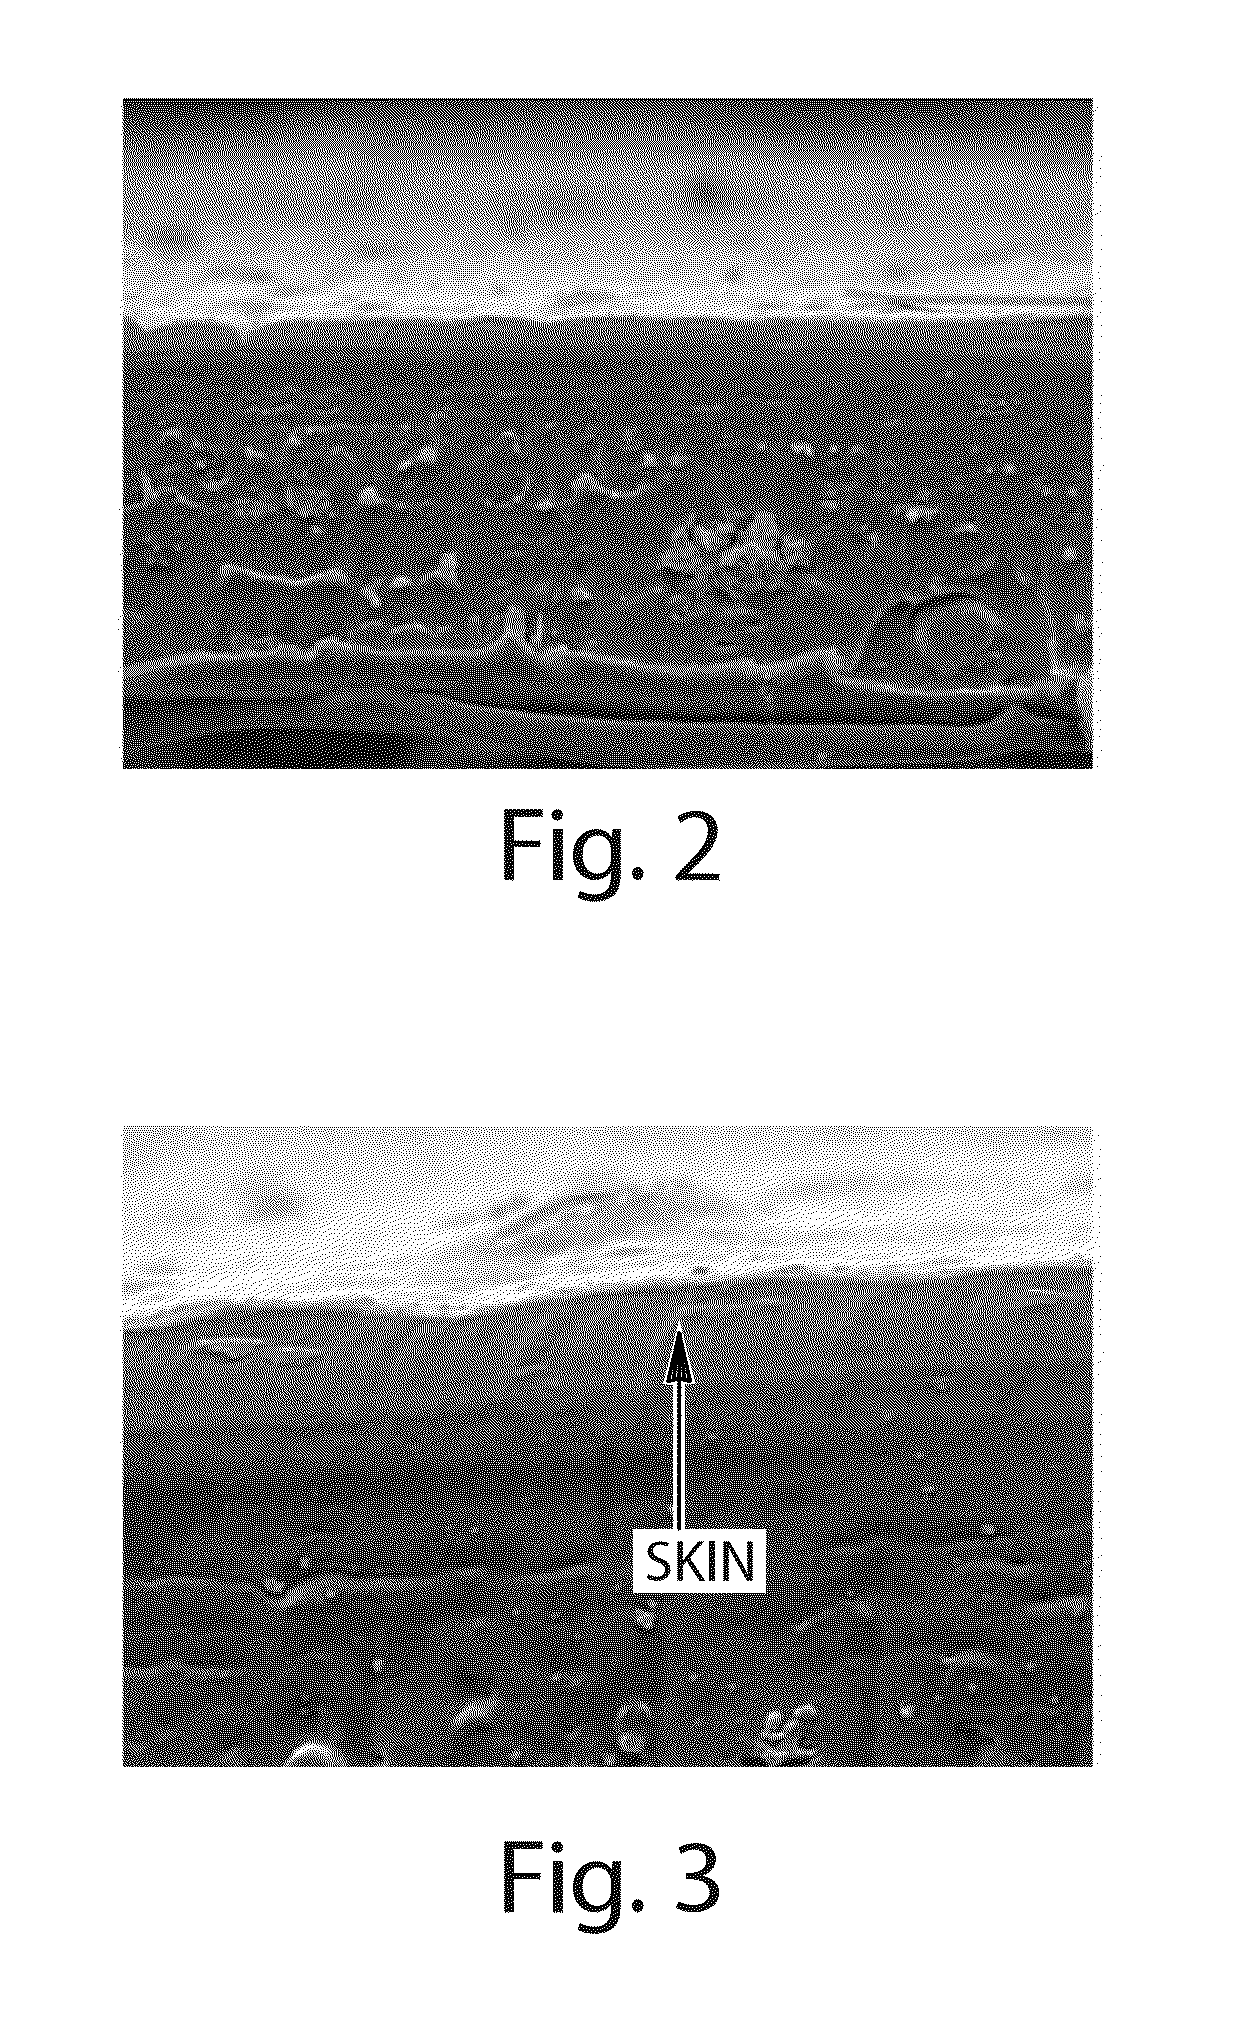 Absorbent articles comprising stretch laminates